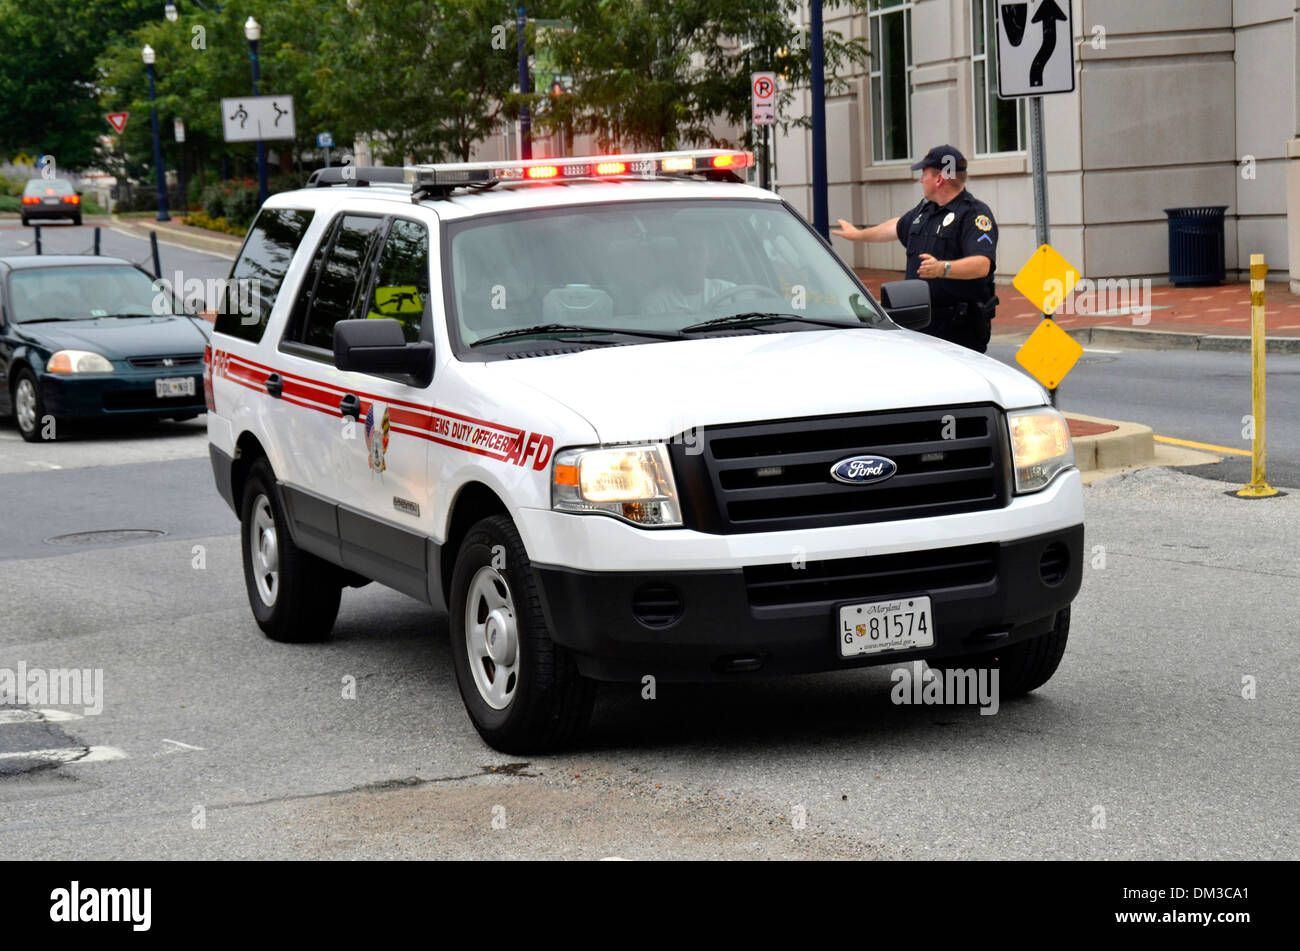 Medic supervisor car in Annapolis, Maryland Stock Photo